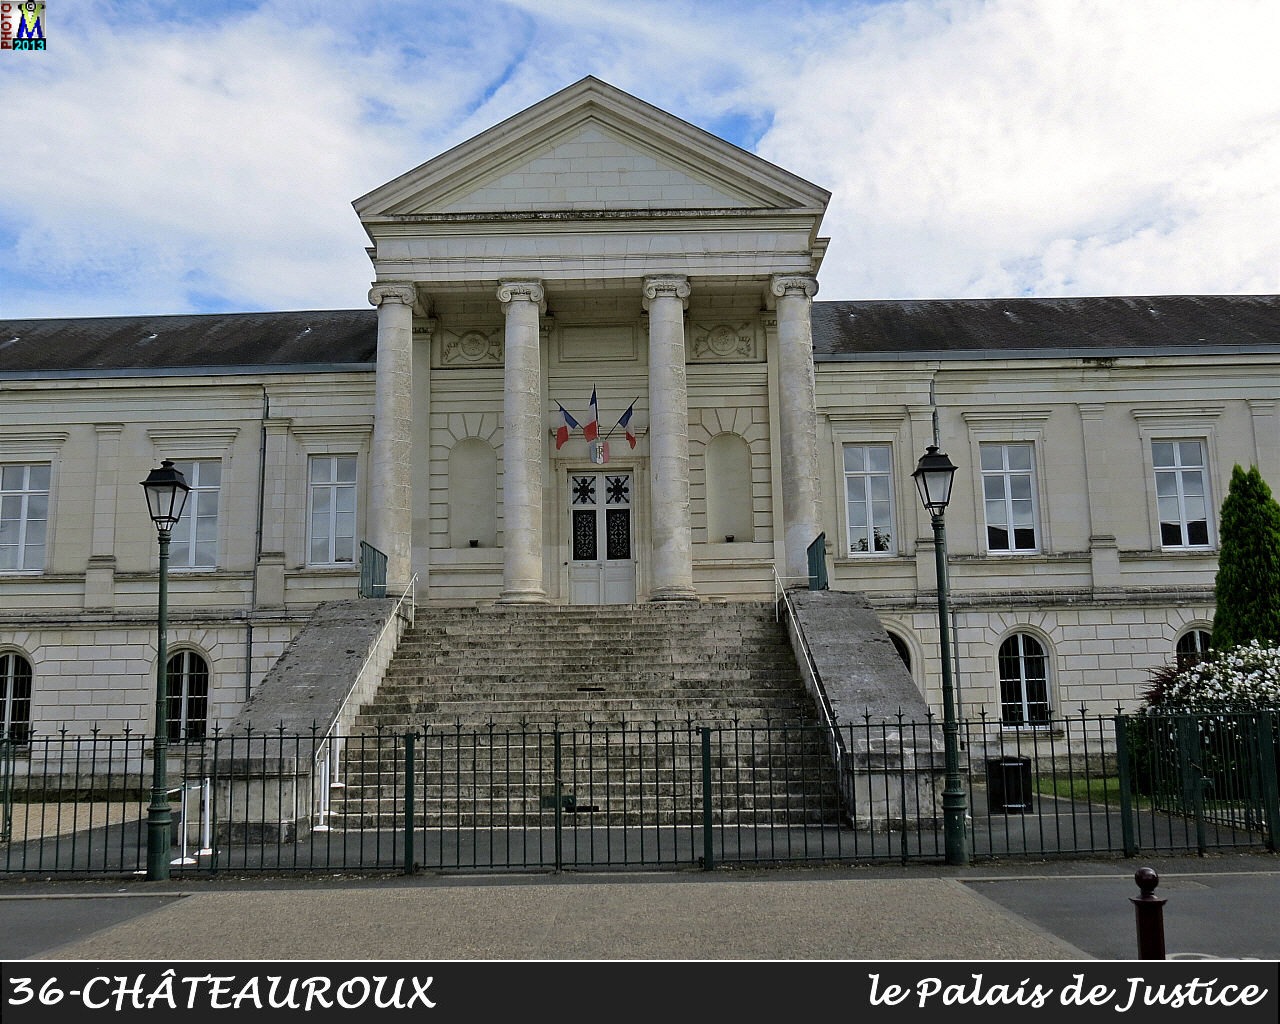 36CHATEAUROUX_justice_100.jpg